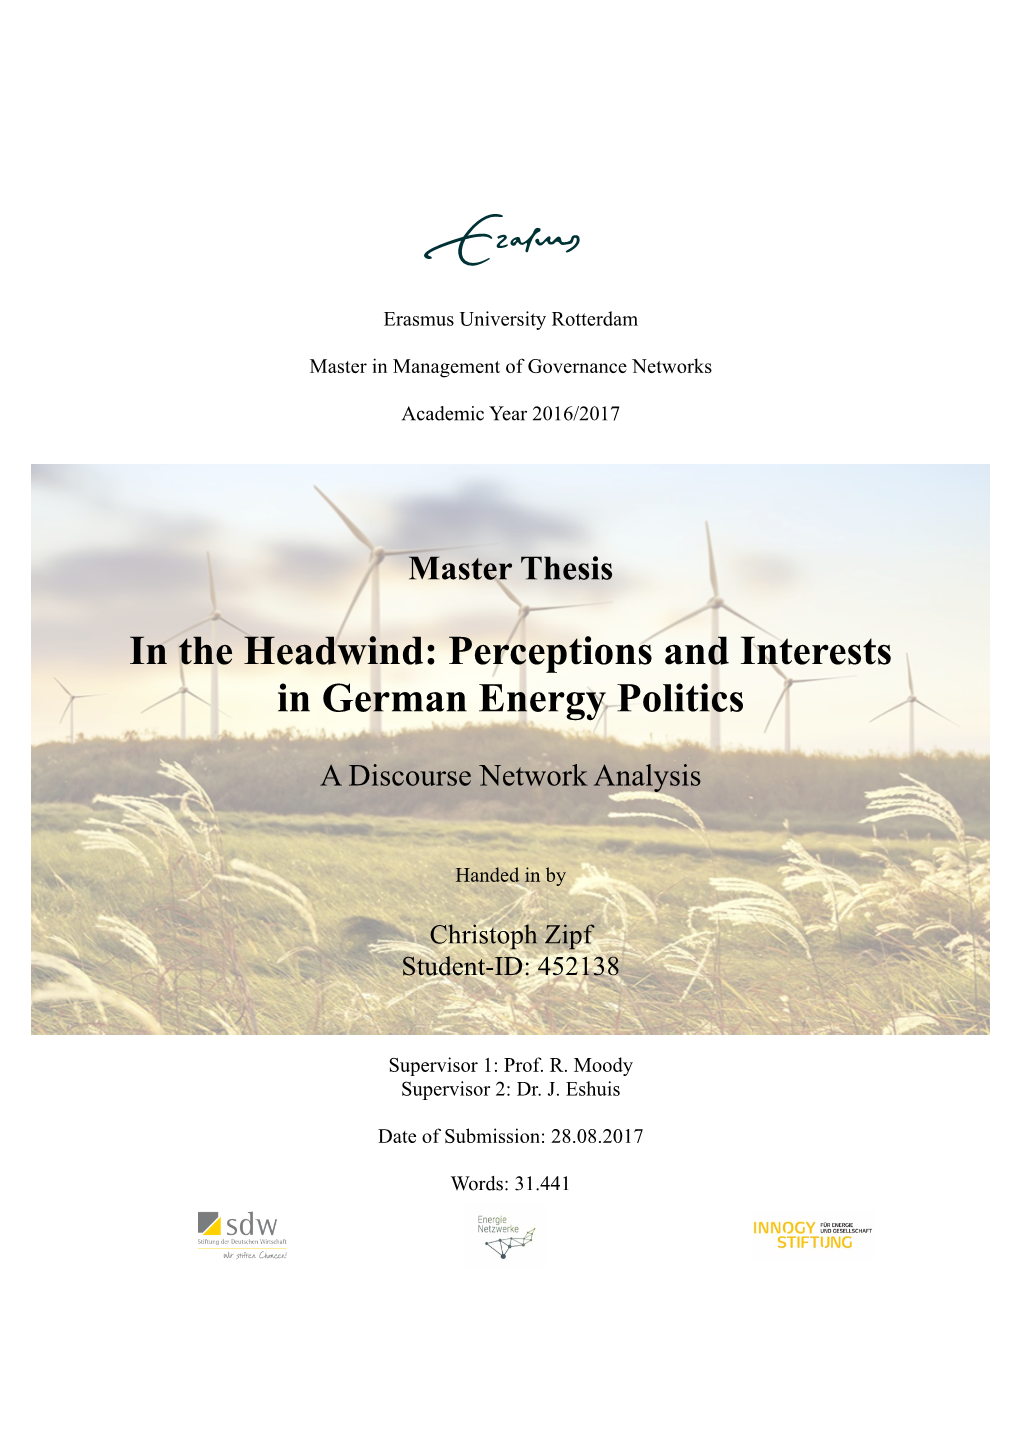 Perceptions and Interests in German Energy Politics